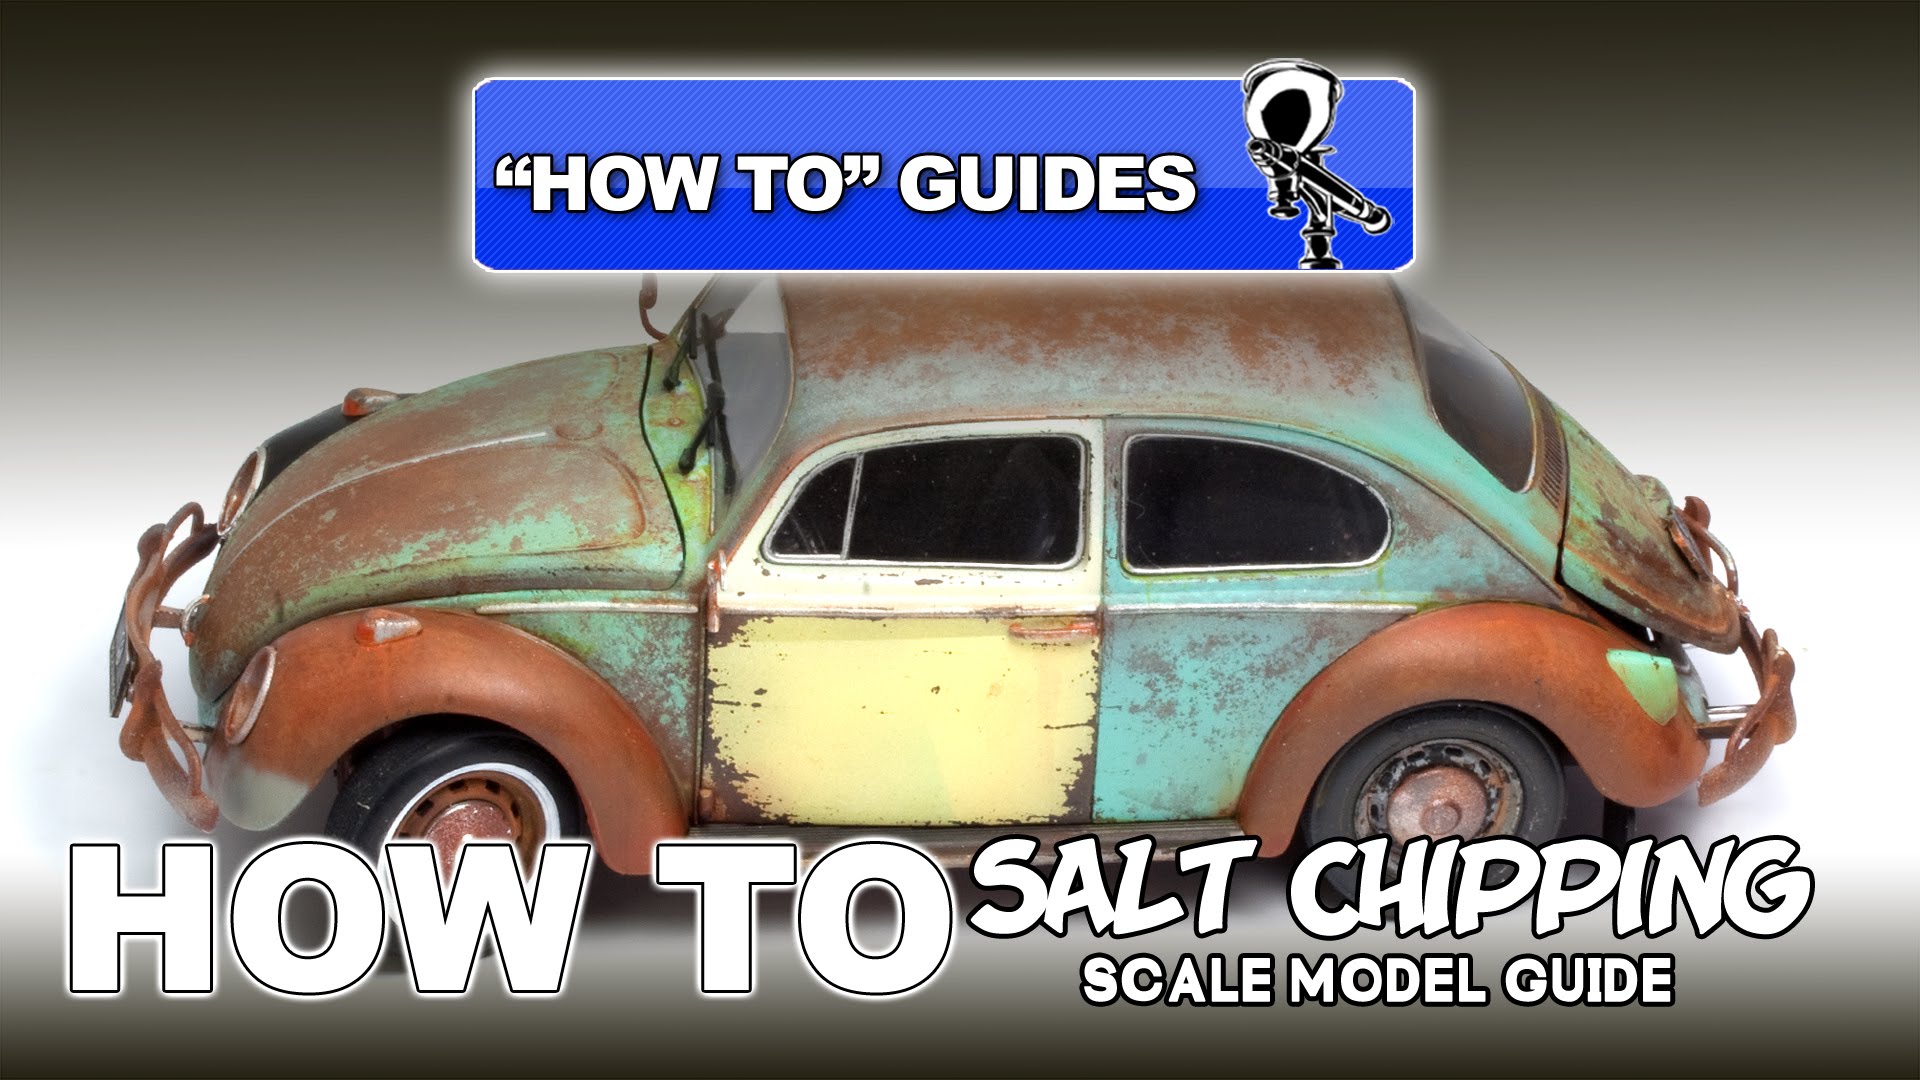 SALT CHIPPING - SCALE MODEL HOW TO GUIDE - YouTube